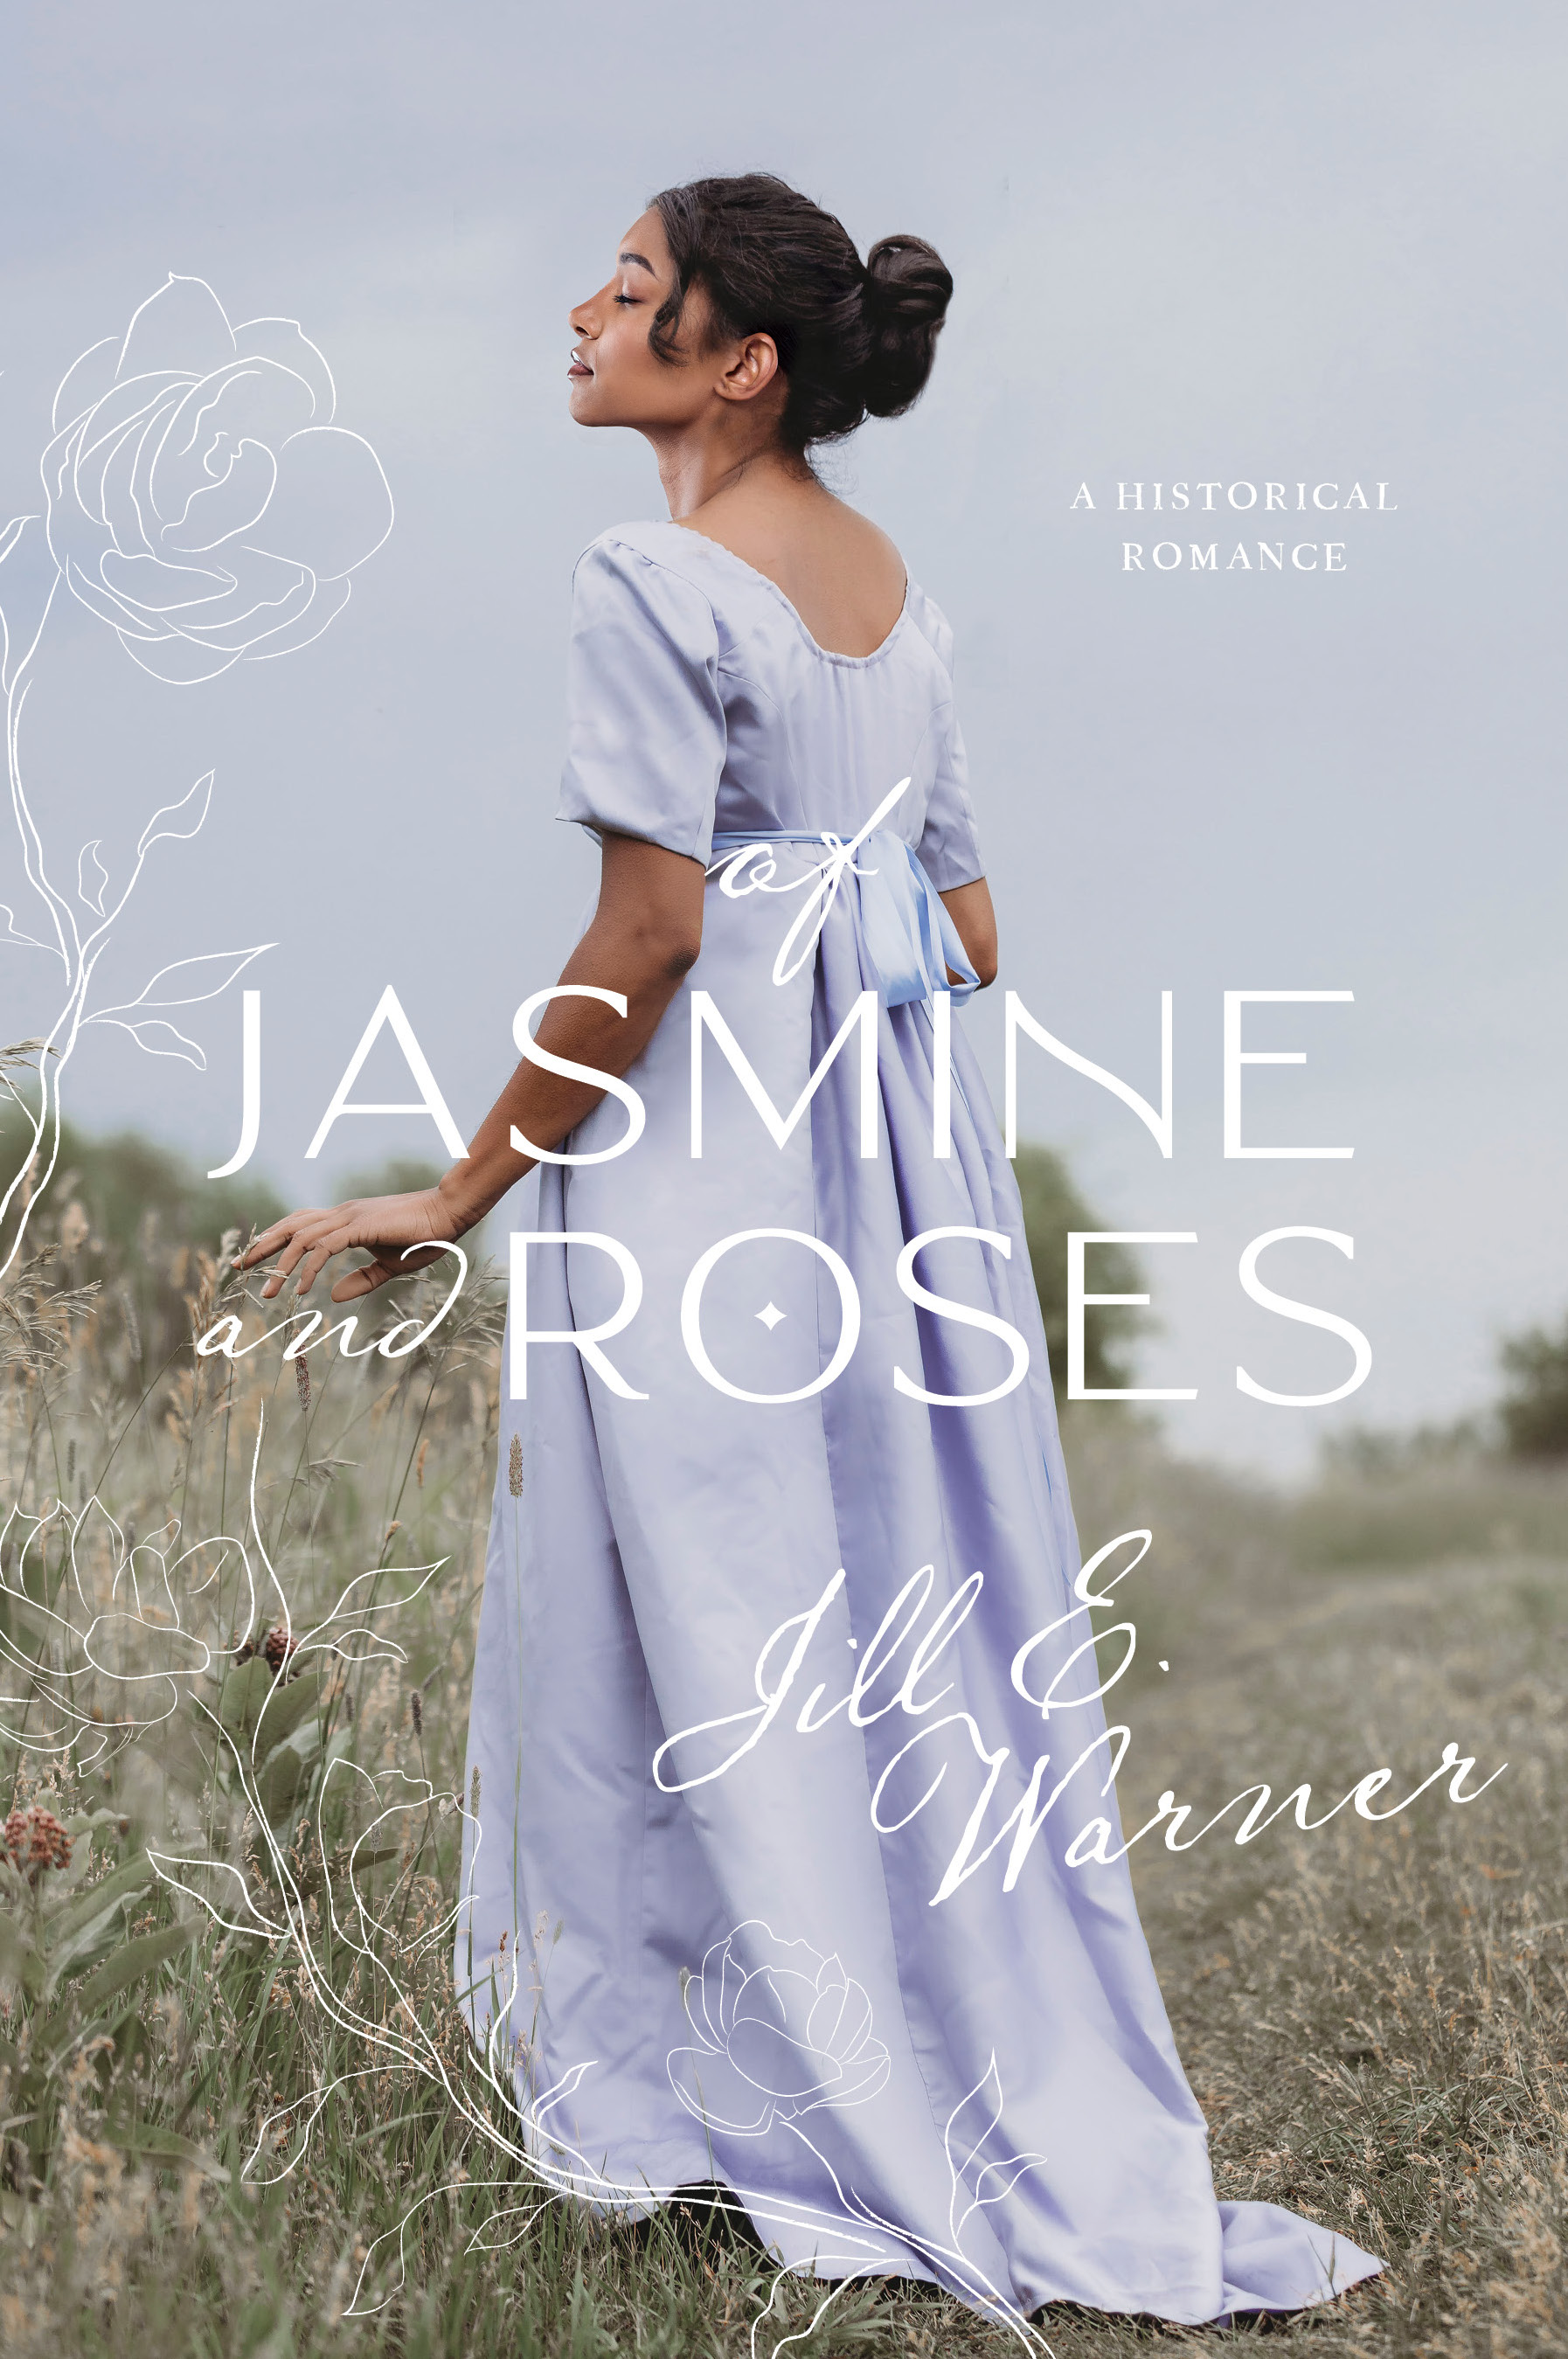 Of Jasmine and Roses cover